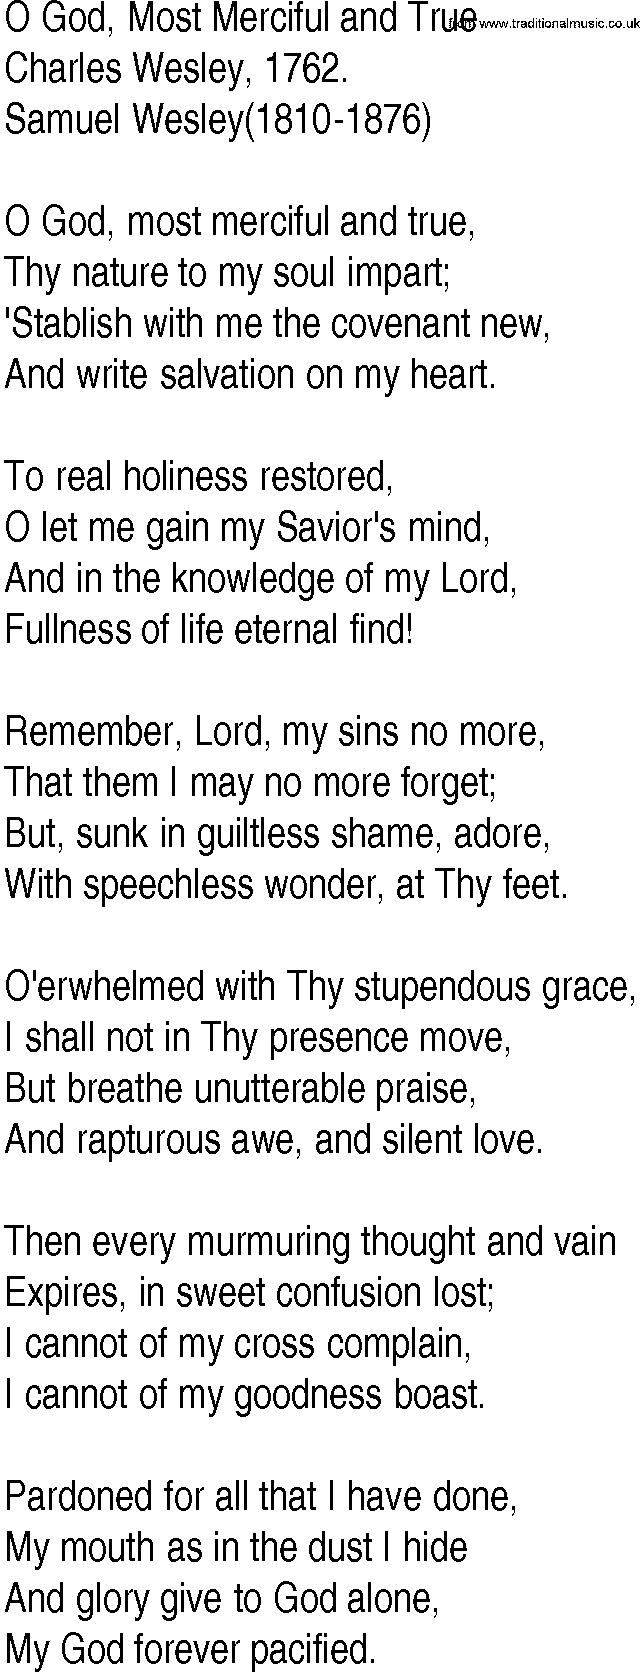 Hymn and Gospel Song: O God, Most Merciful and True by Charles Wesley lyrics